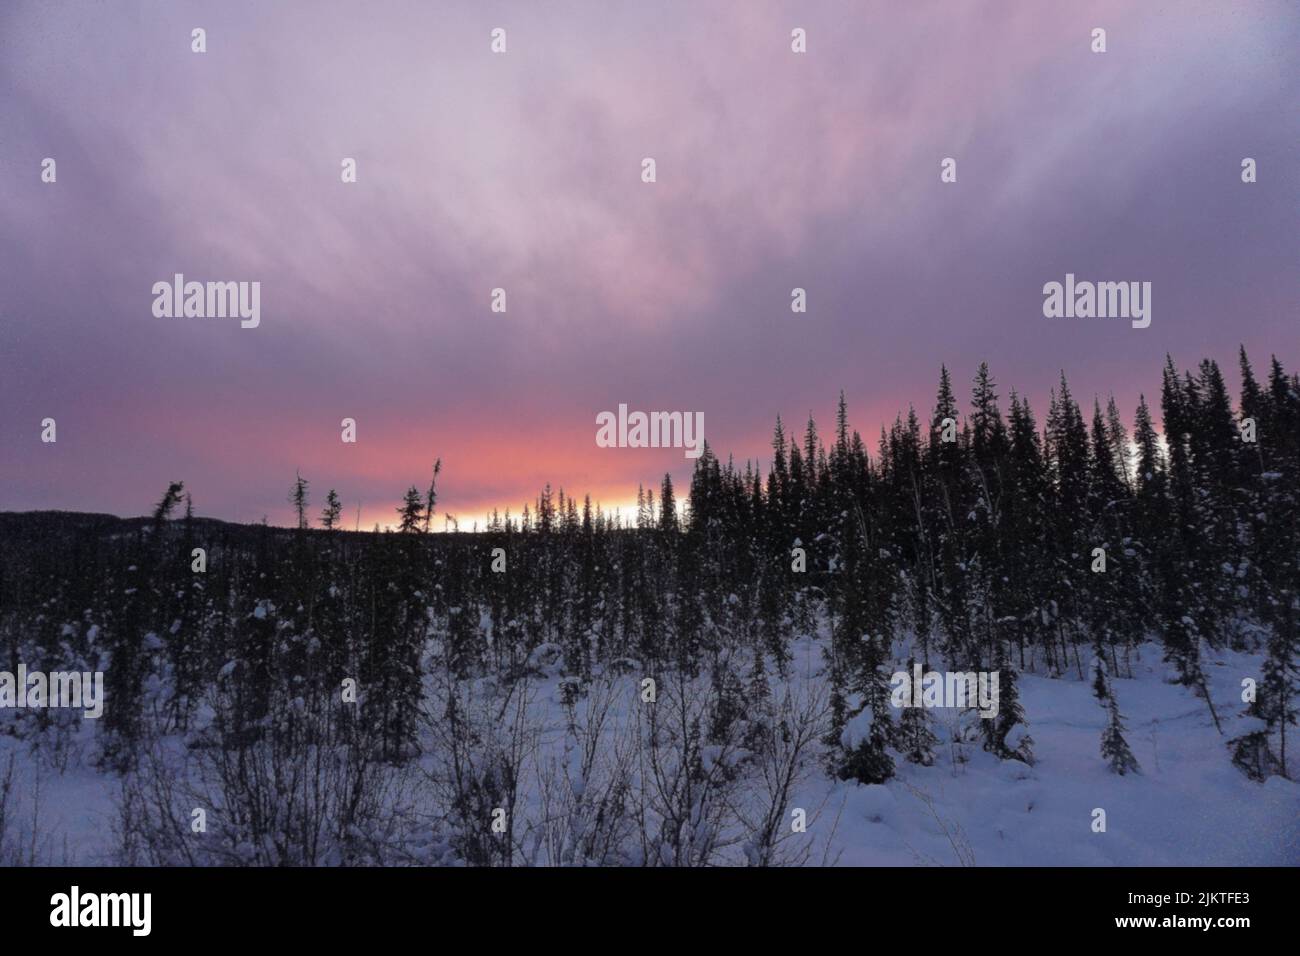 A sunset in an Alaskan forest and northern lights Stock Photo